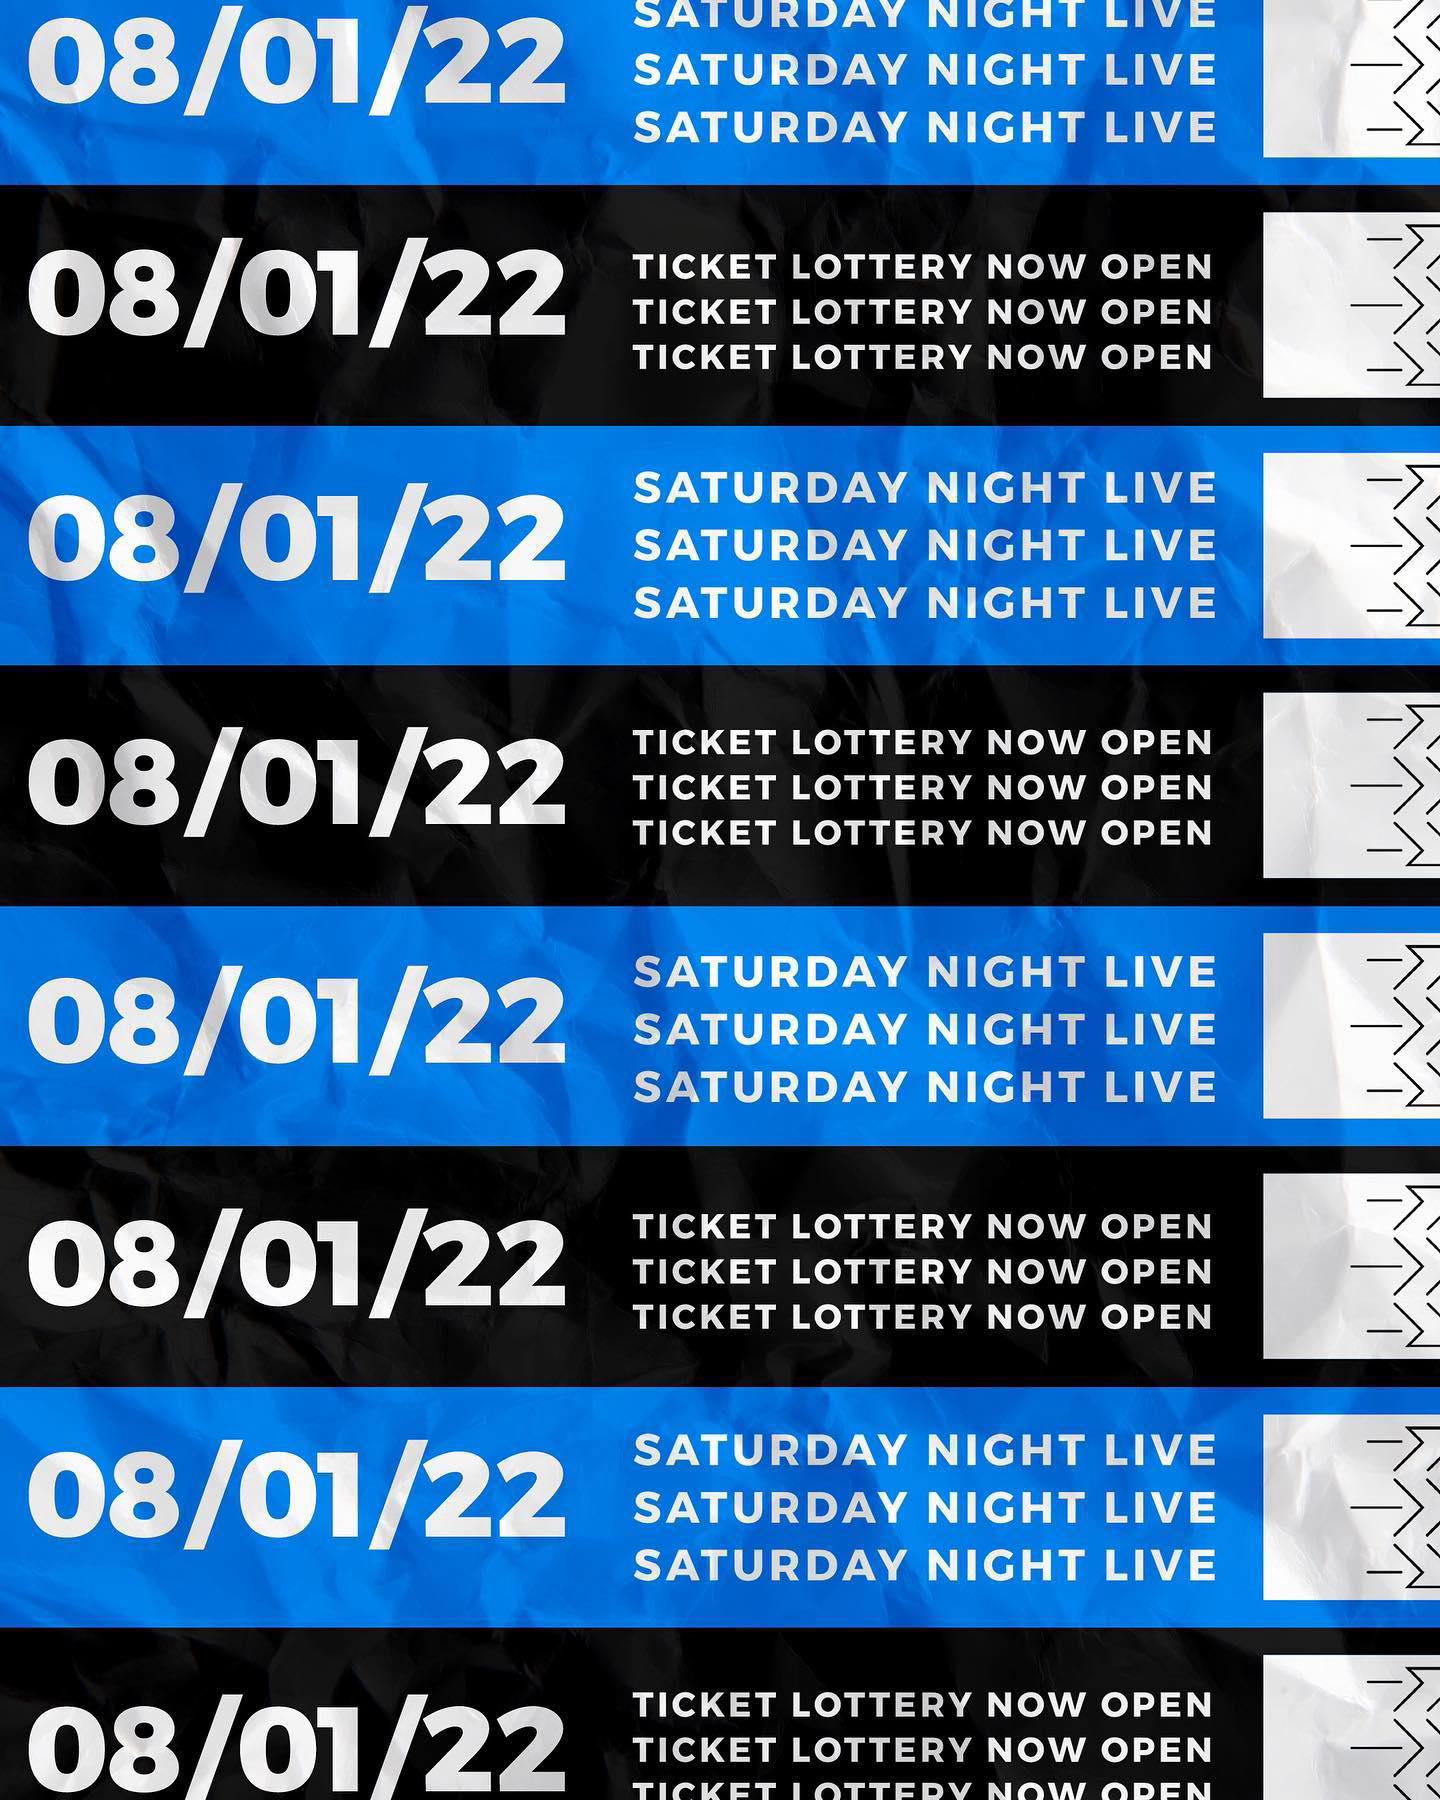 Saturday Night Live - The ticket lottery is now OPEN